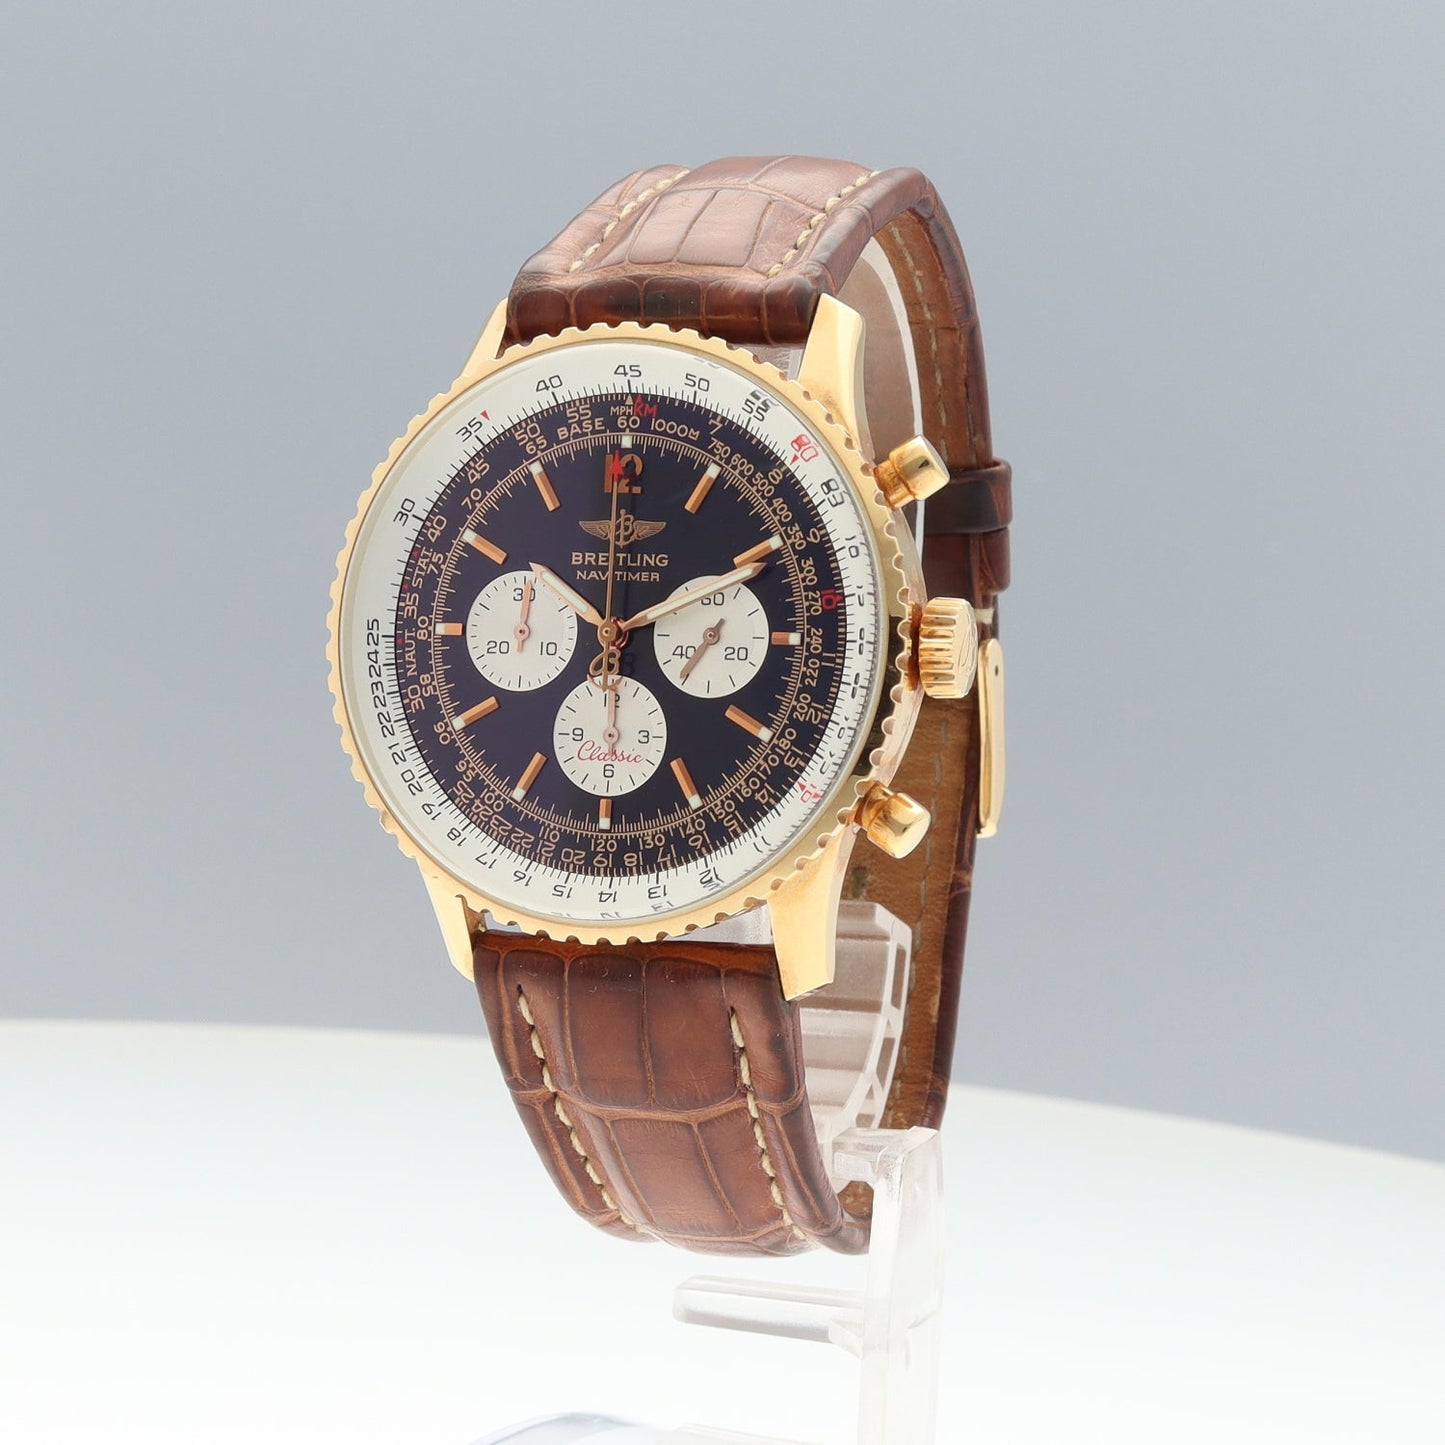 H30330　Navitimer limited edition of 100 PG　2BRT01-00168